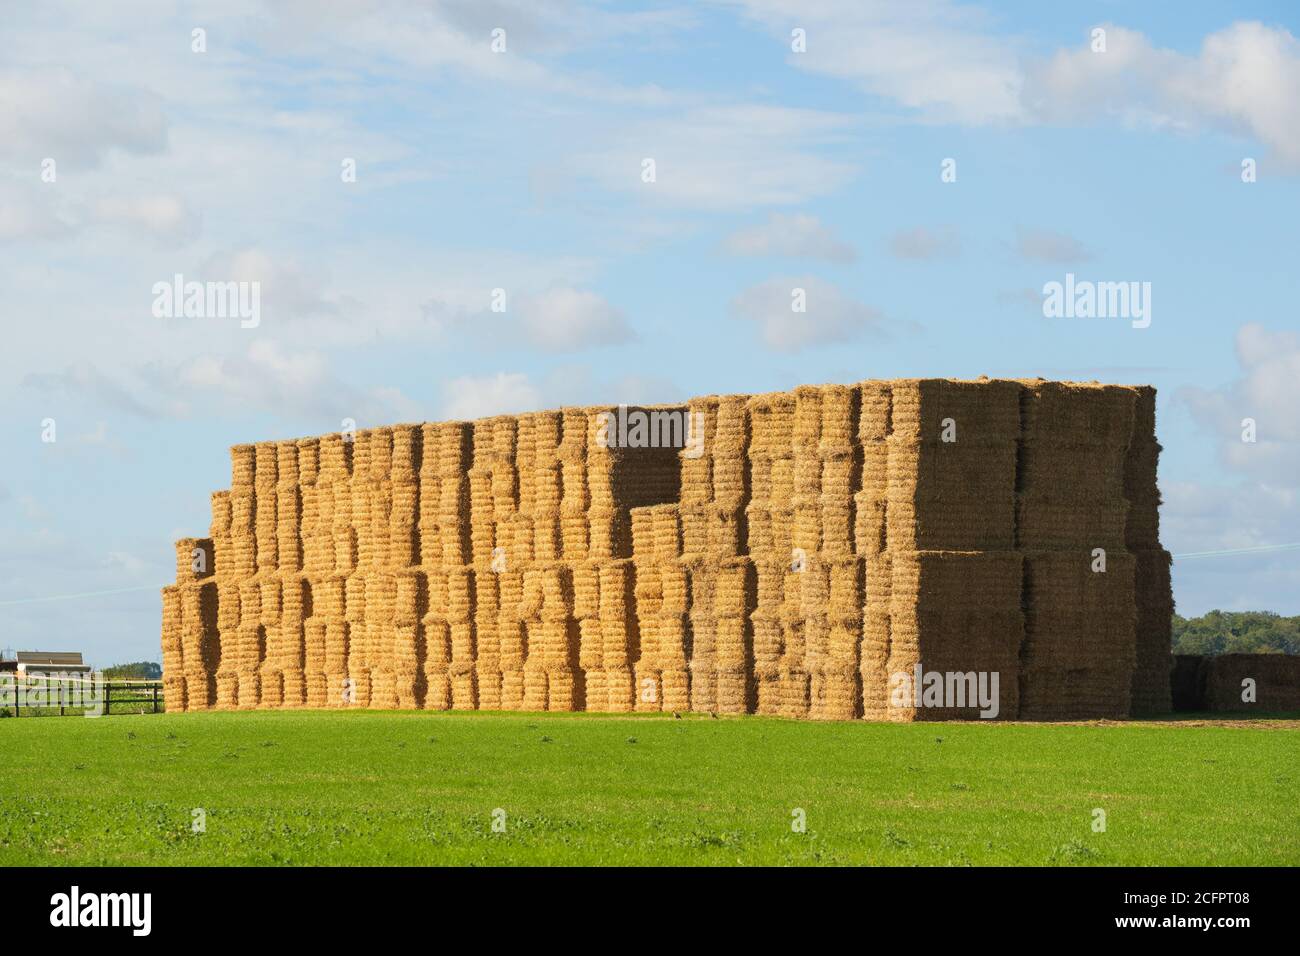 A large stack of hay bales in a field late summer. Much Hadham, Hertfordshire. England. UK Stock Photo